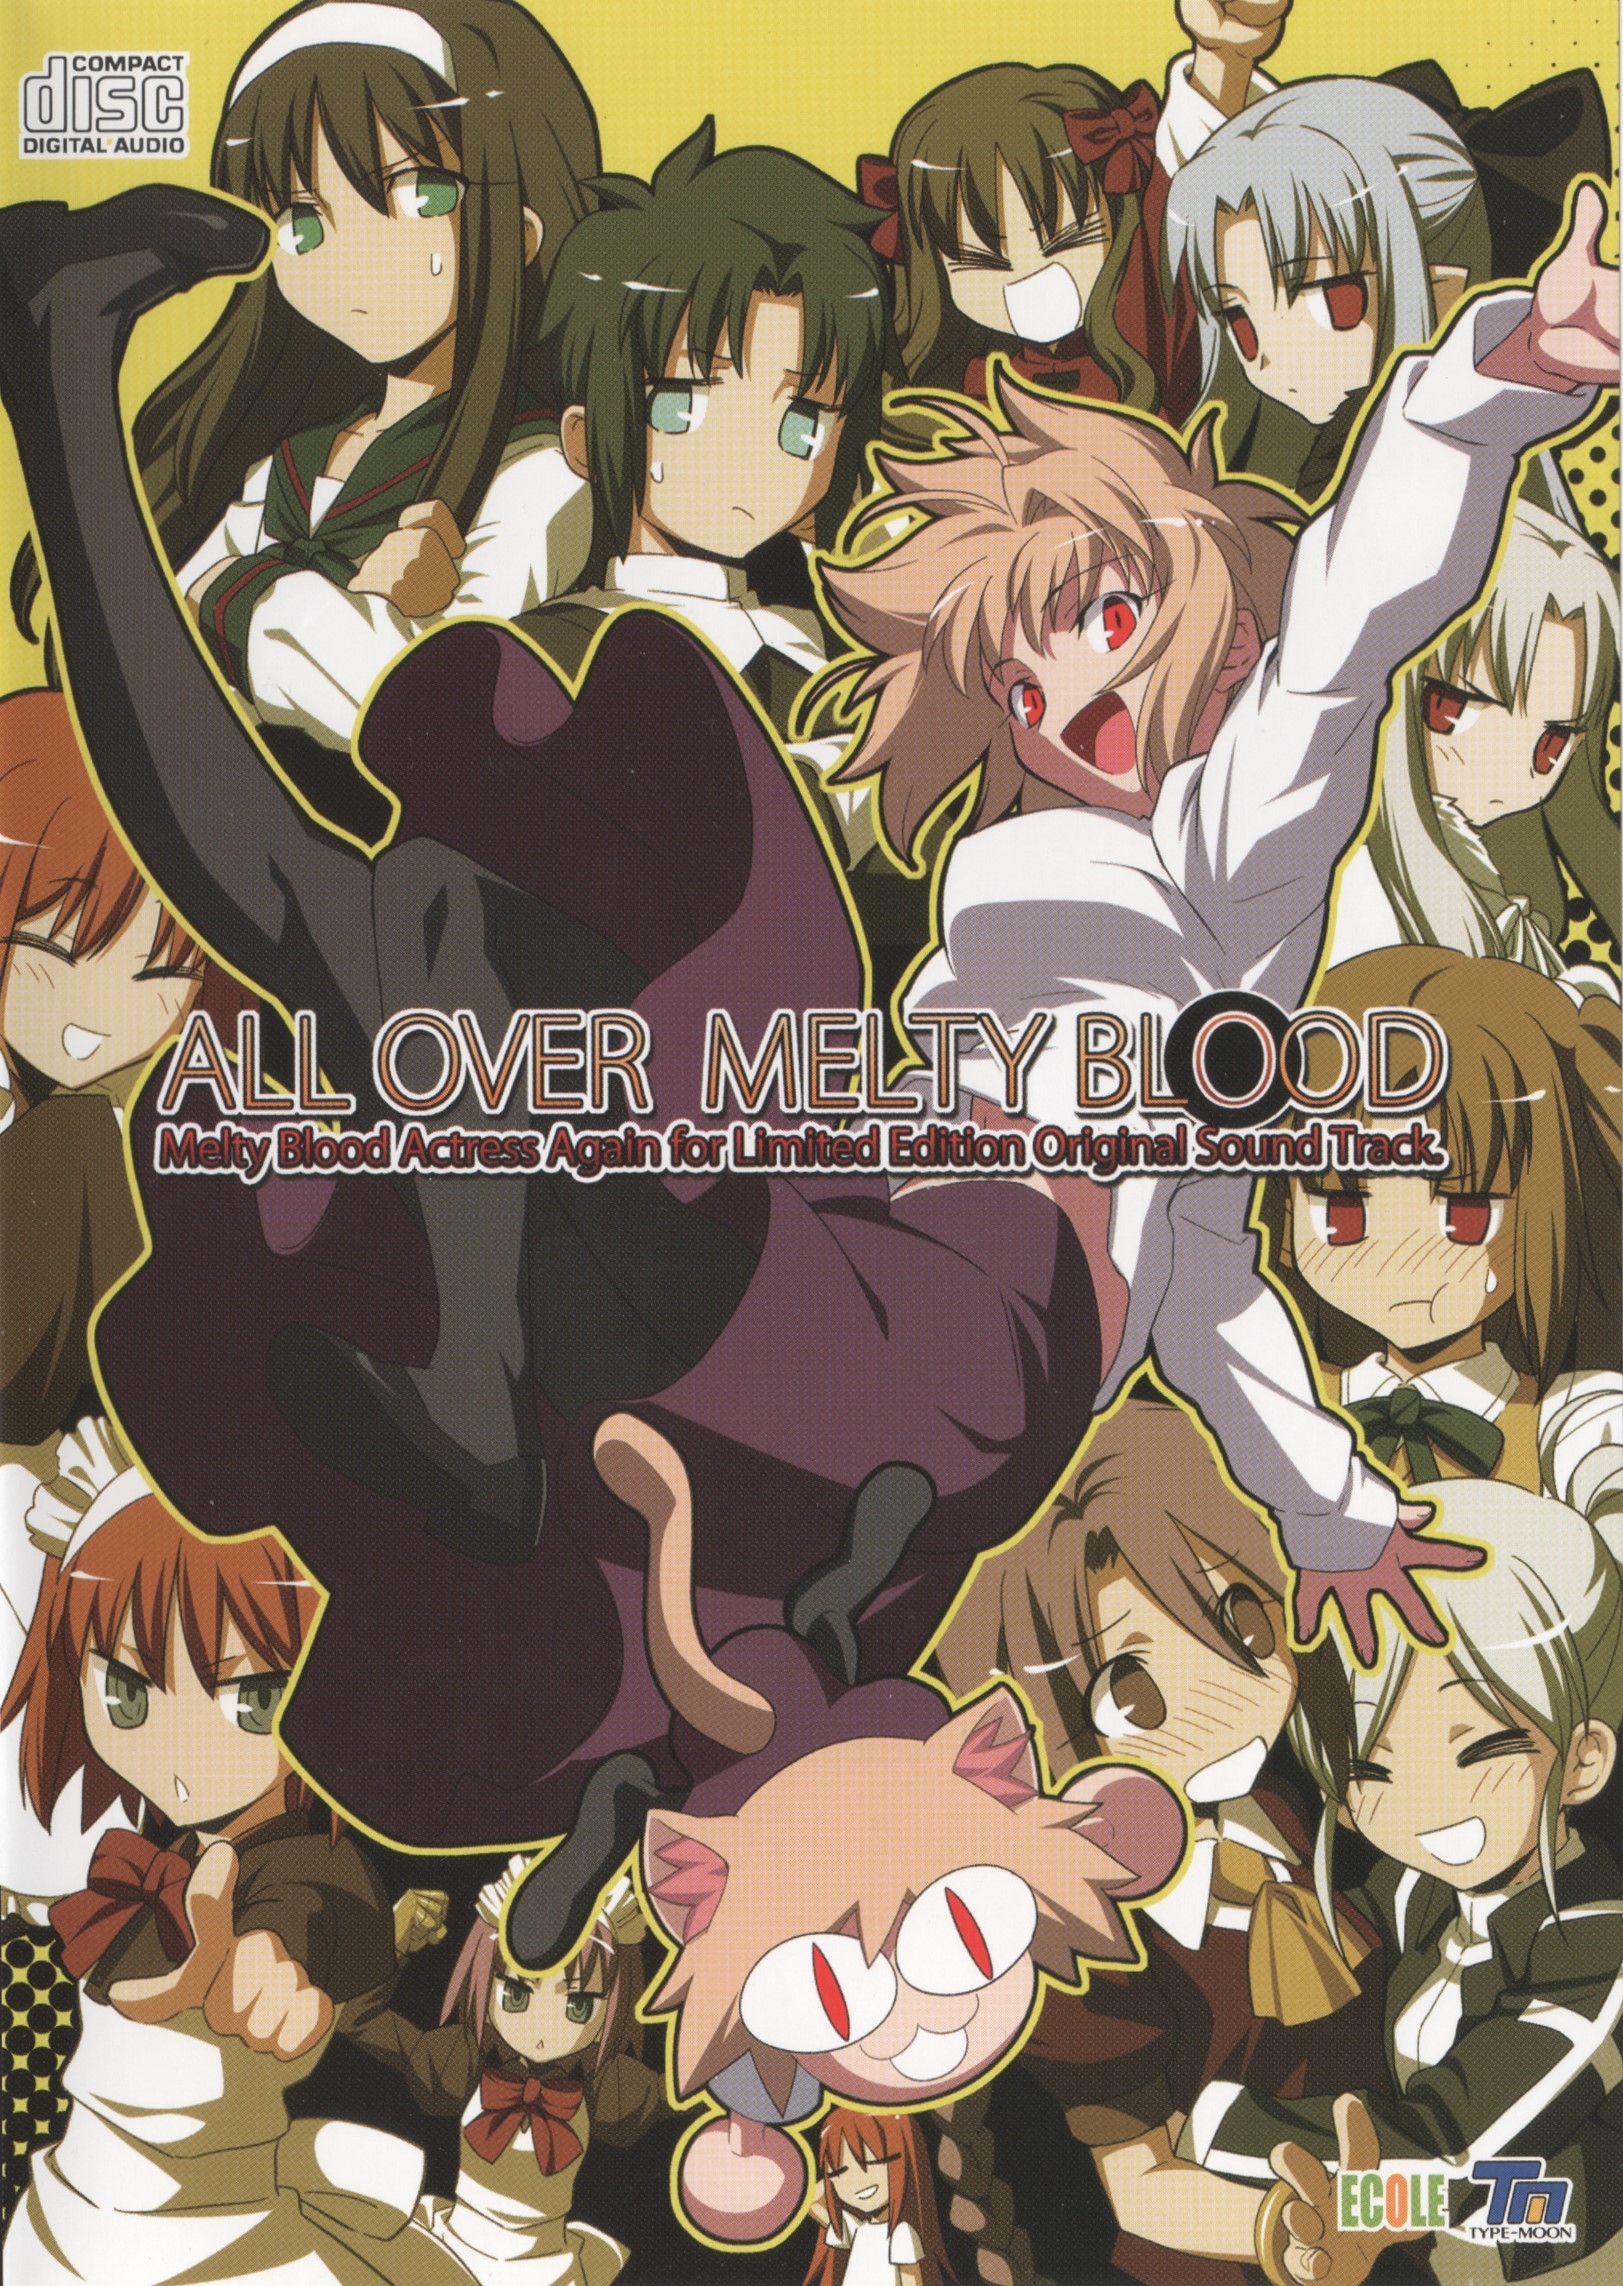 ALL OVER MELTY BLOOD ~ Melty Blood Actress Again for Limited 